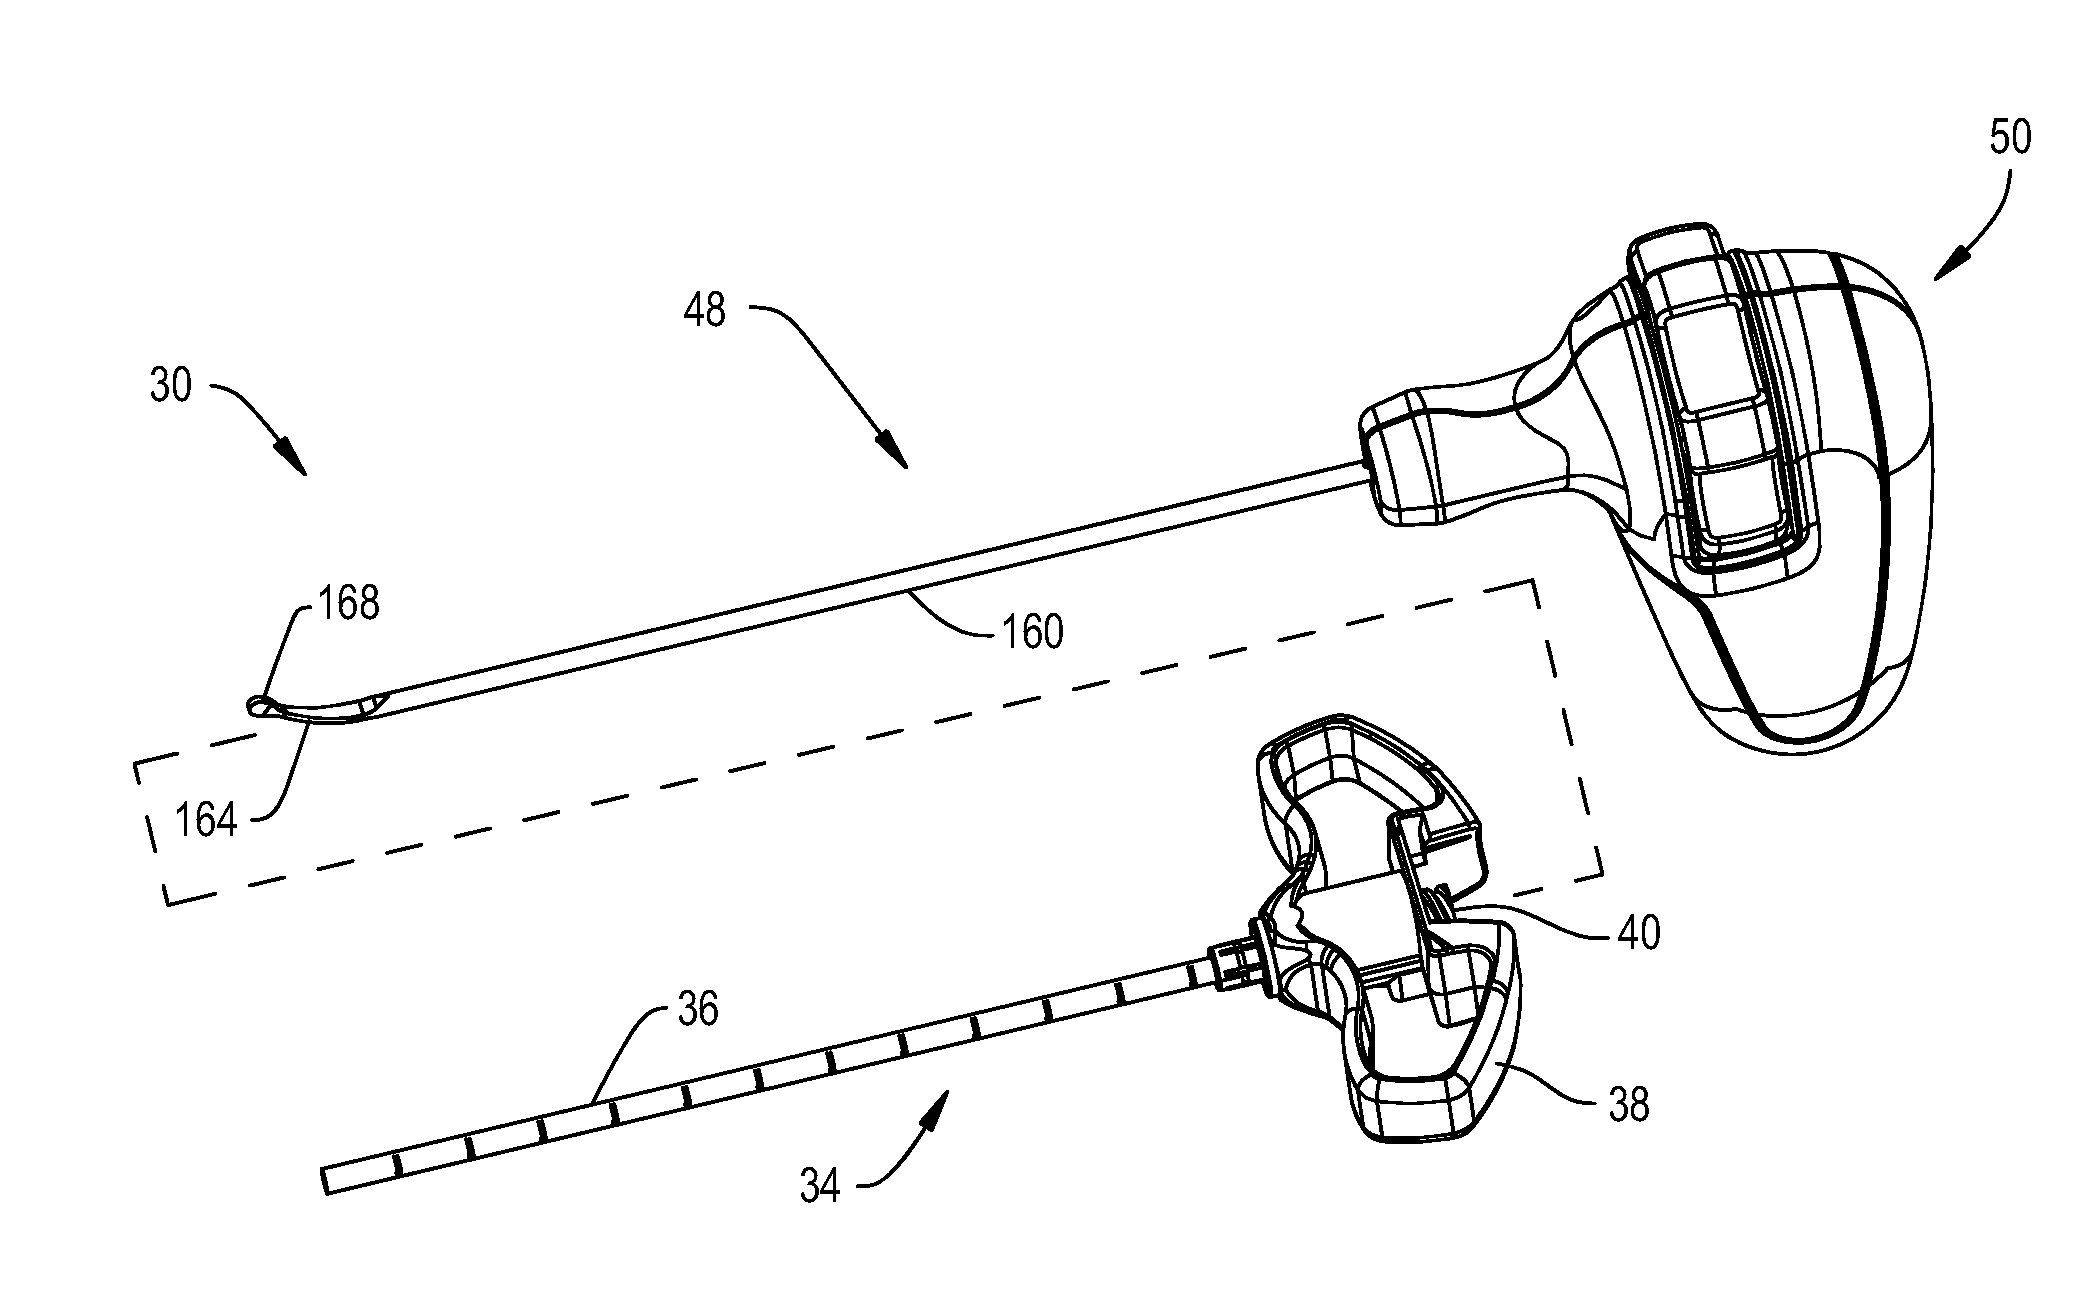 Device for creating a void space in a living tissue, the device including a handle with a control knob that can be set regardless of the orientation of the handle